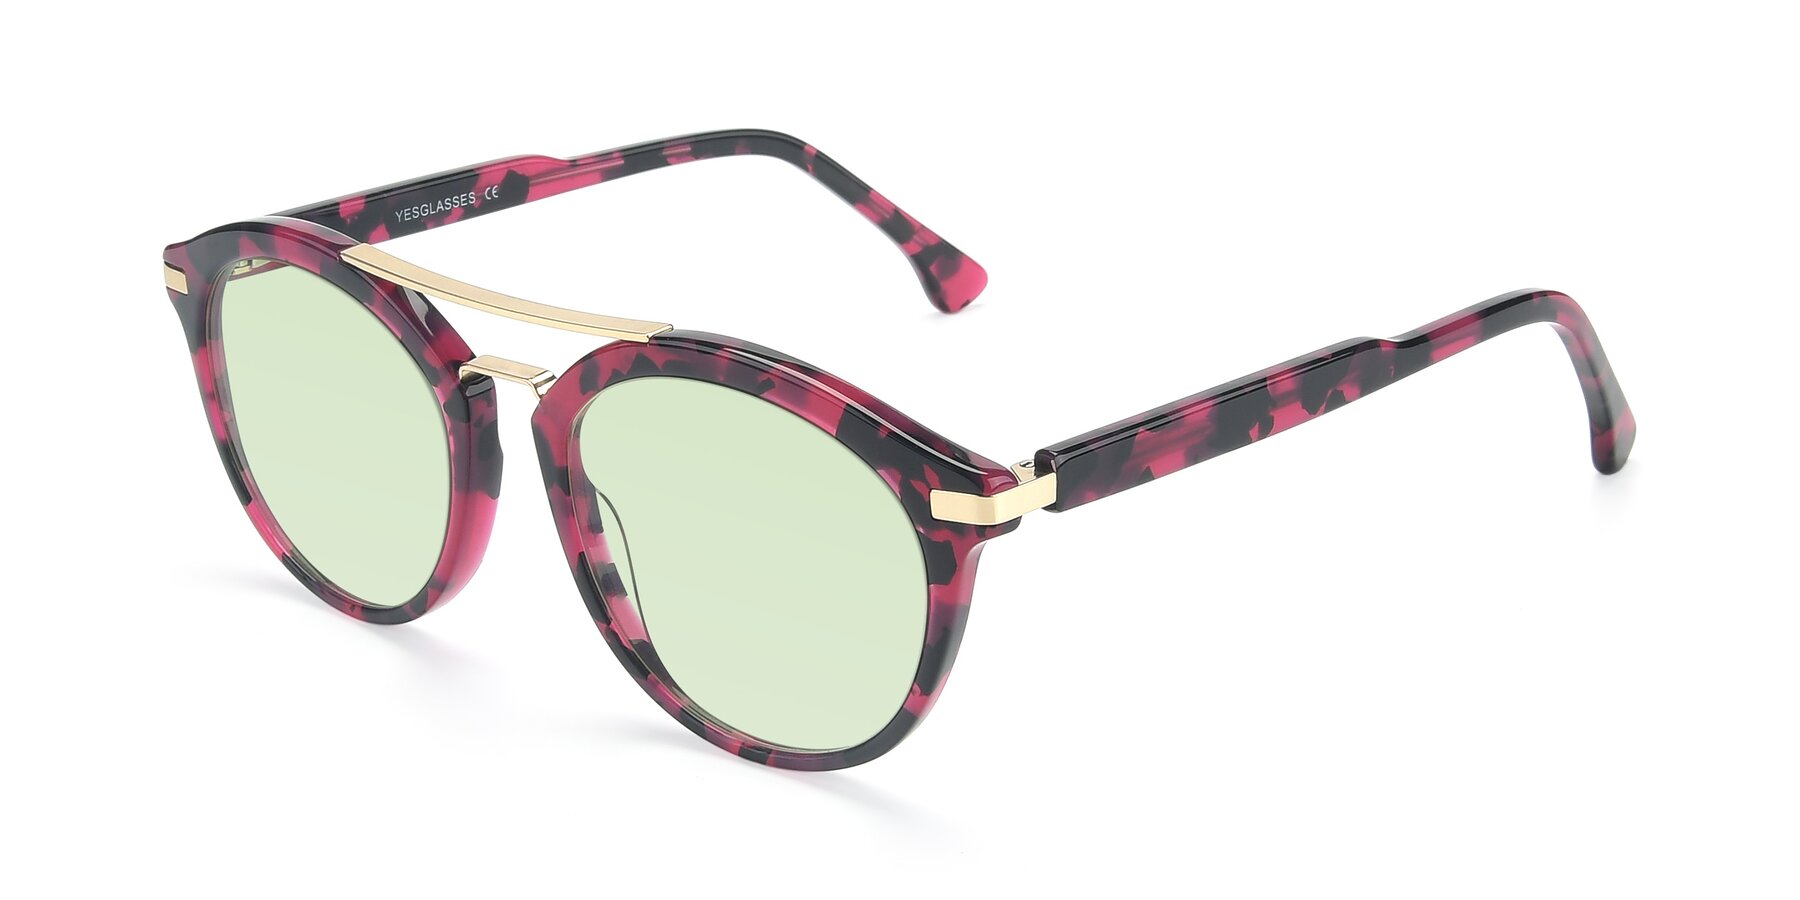 Angle of 17236 in Wine Tortoise with Light Green Tinted Lenses